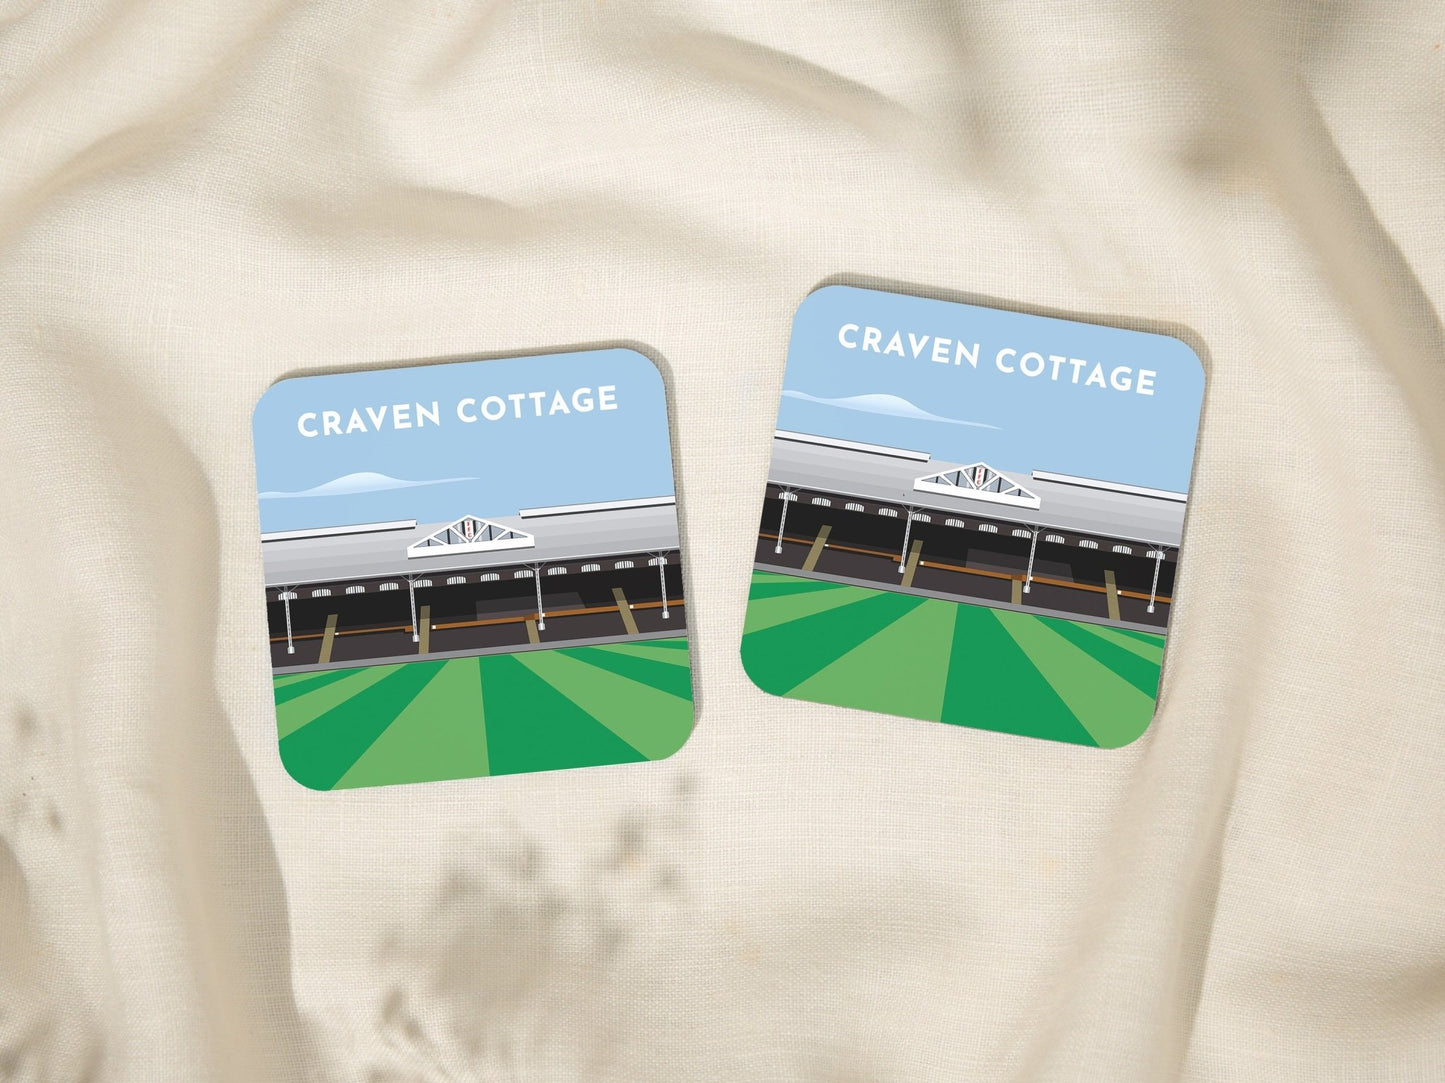 Fulham Gifts Coaster - Craven Cottage Stadium Drinks Coaster - Stocking Filler Gifts for Him Her - Soccer Gift for Kids - Turf Football Art